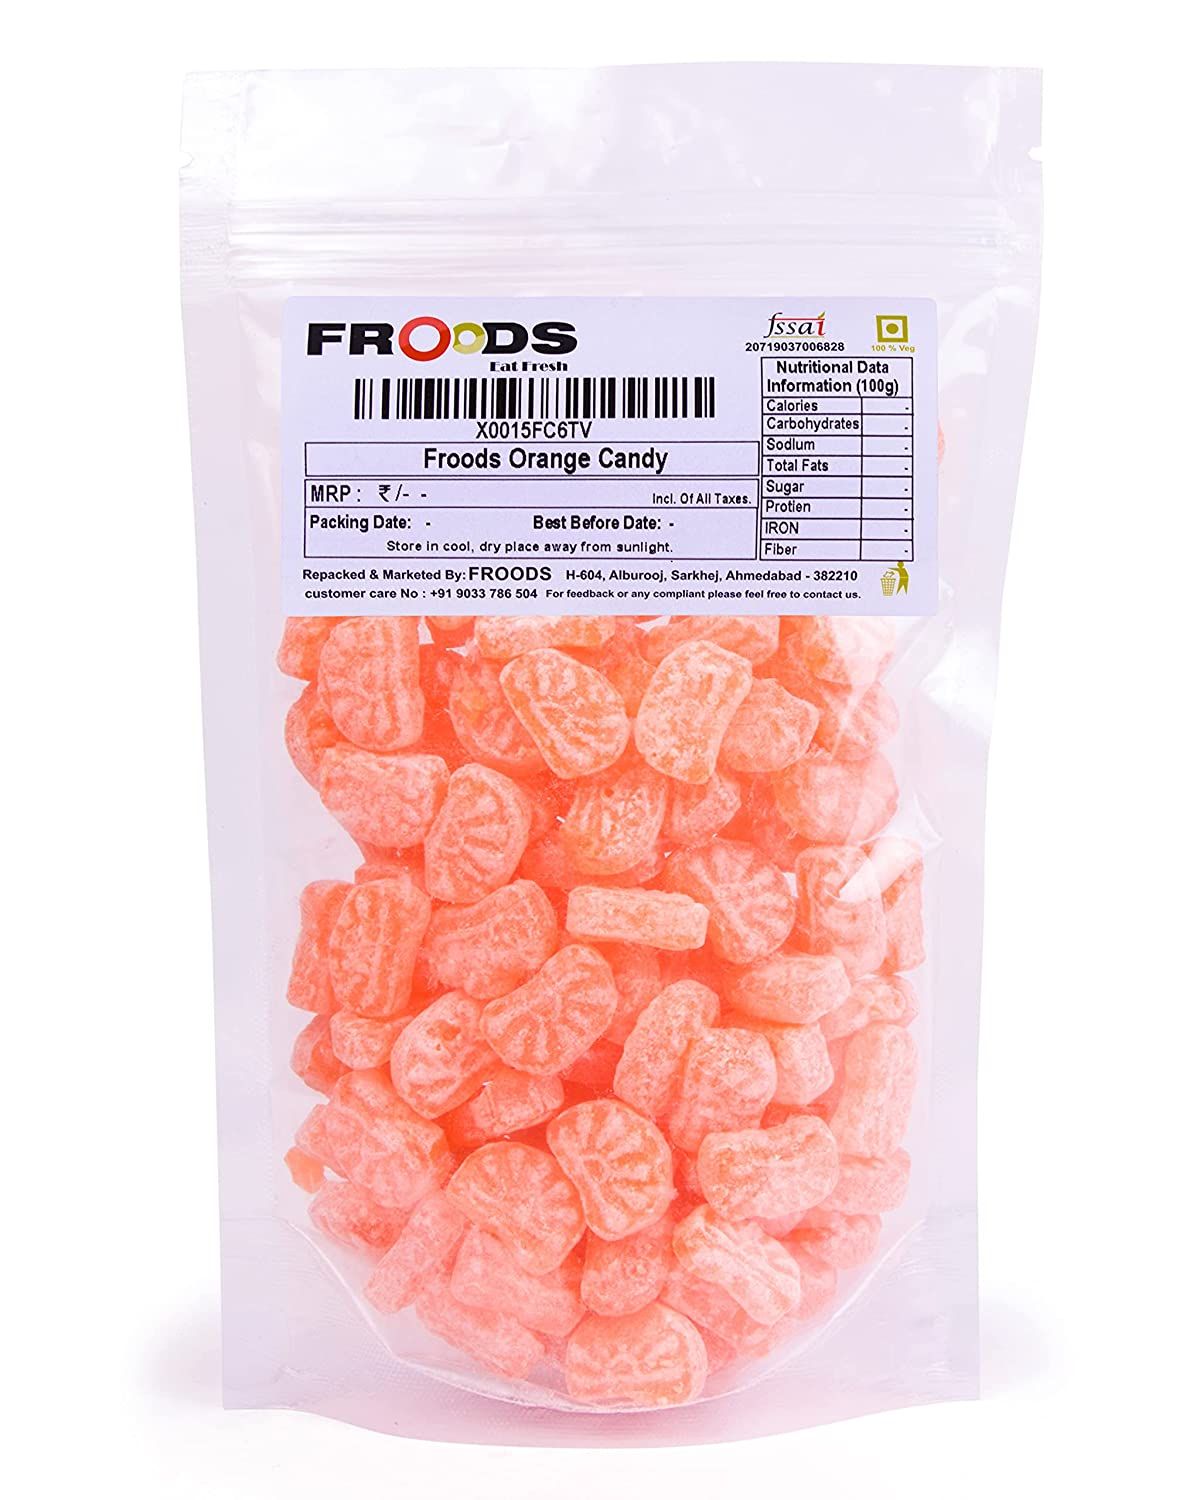 Froods Orange Candy Image